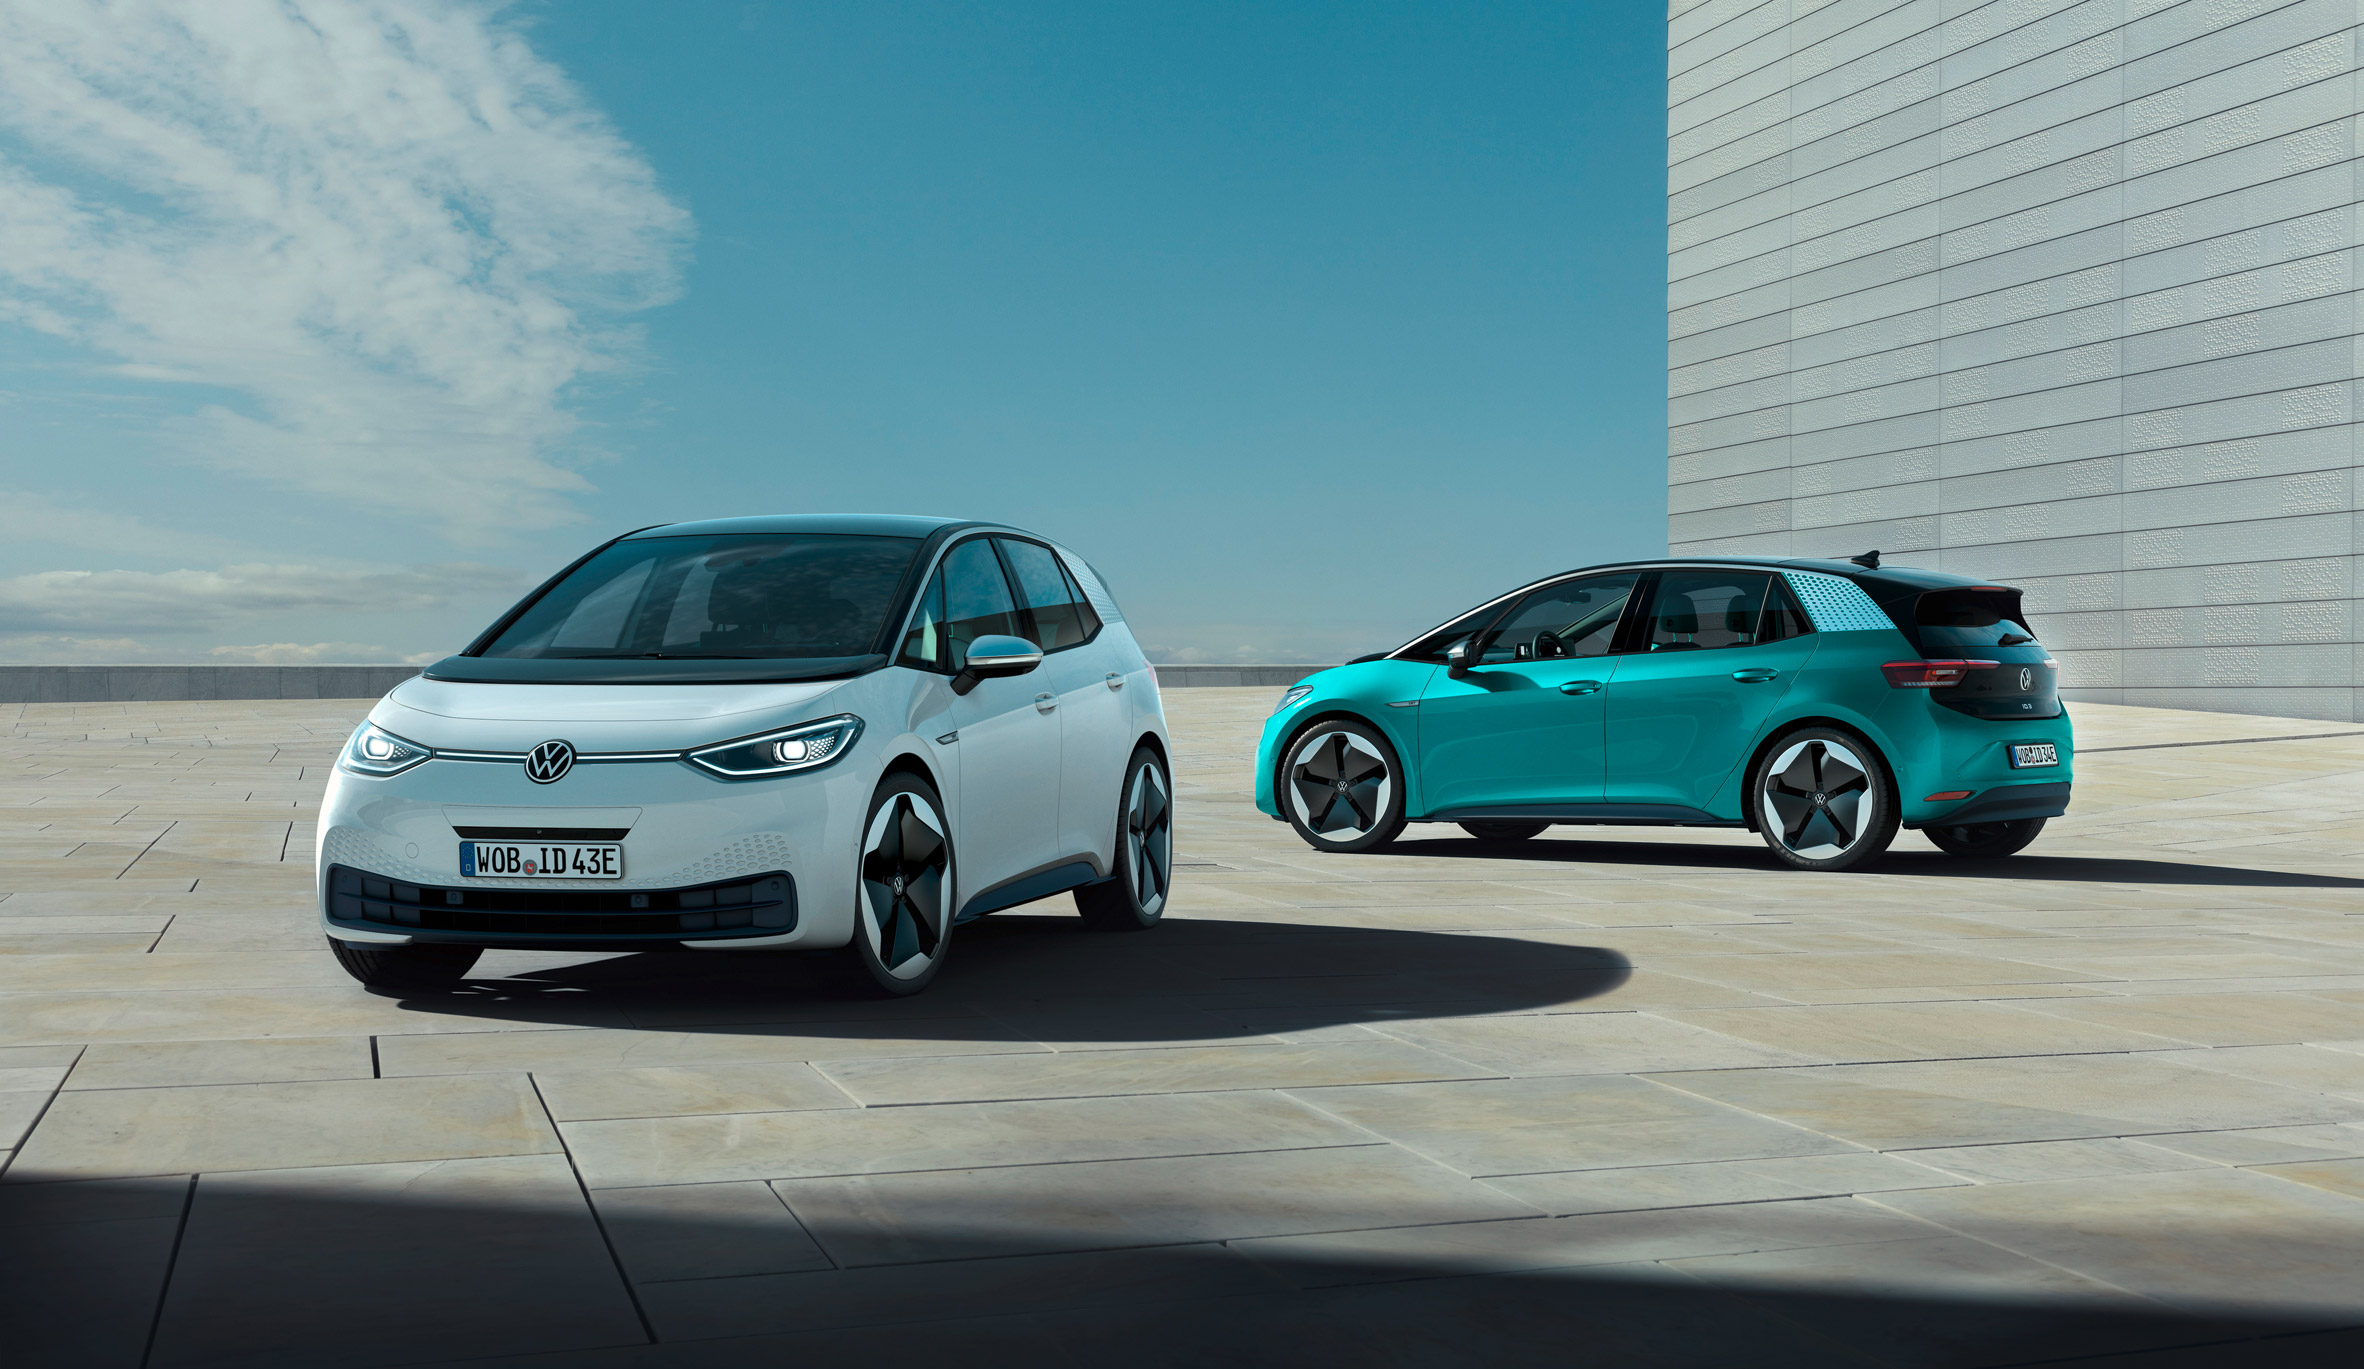 Volkswagen ties in new electric ID car line with company rebrand